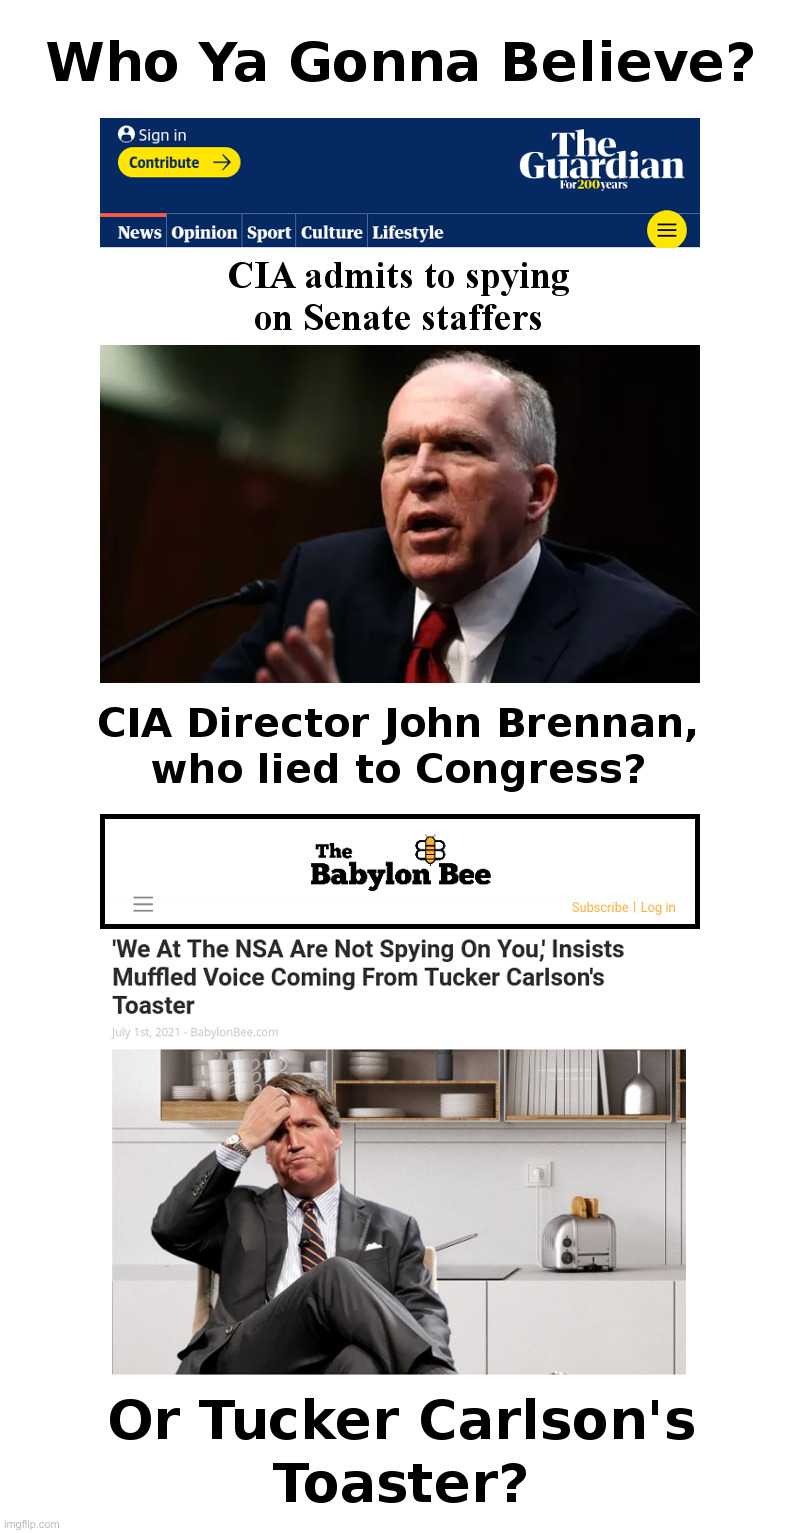 Who Ya Gonna Believe? | image tagged in cia,nsa,spies,tucker carlson,bugged,toaster | made w/ Imgflip meme maker